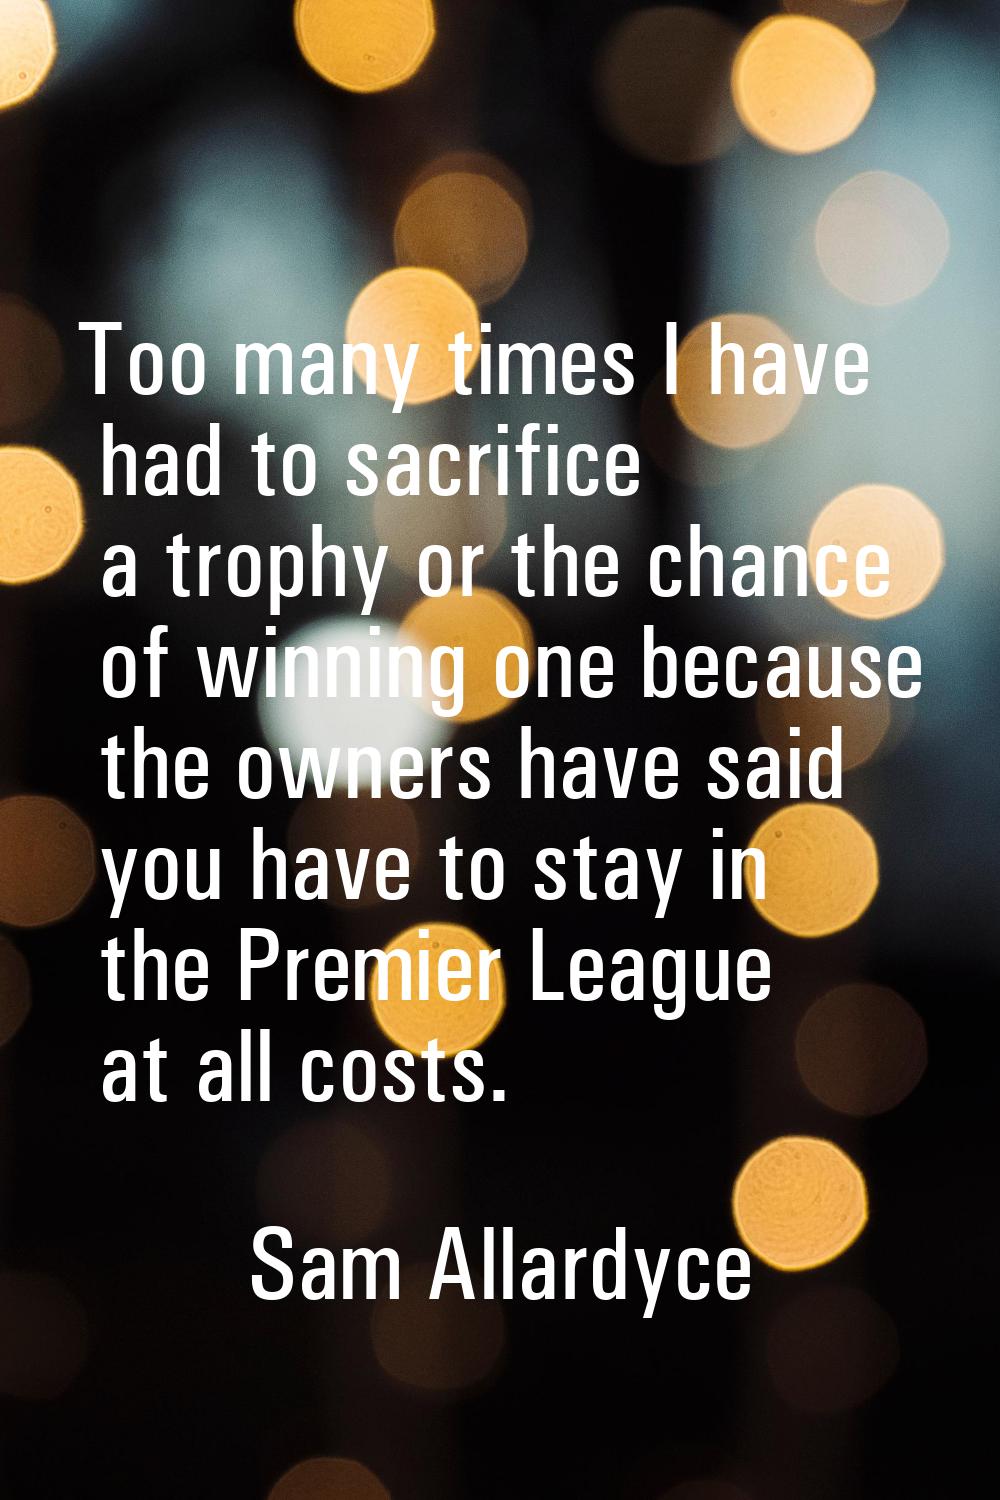 Too many times I have had to sacrifice a trophy or the chance of winning one because the owners hav